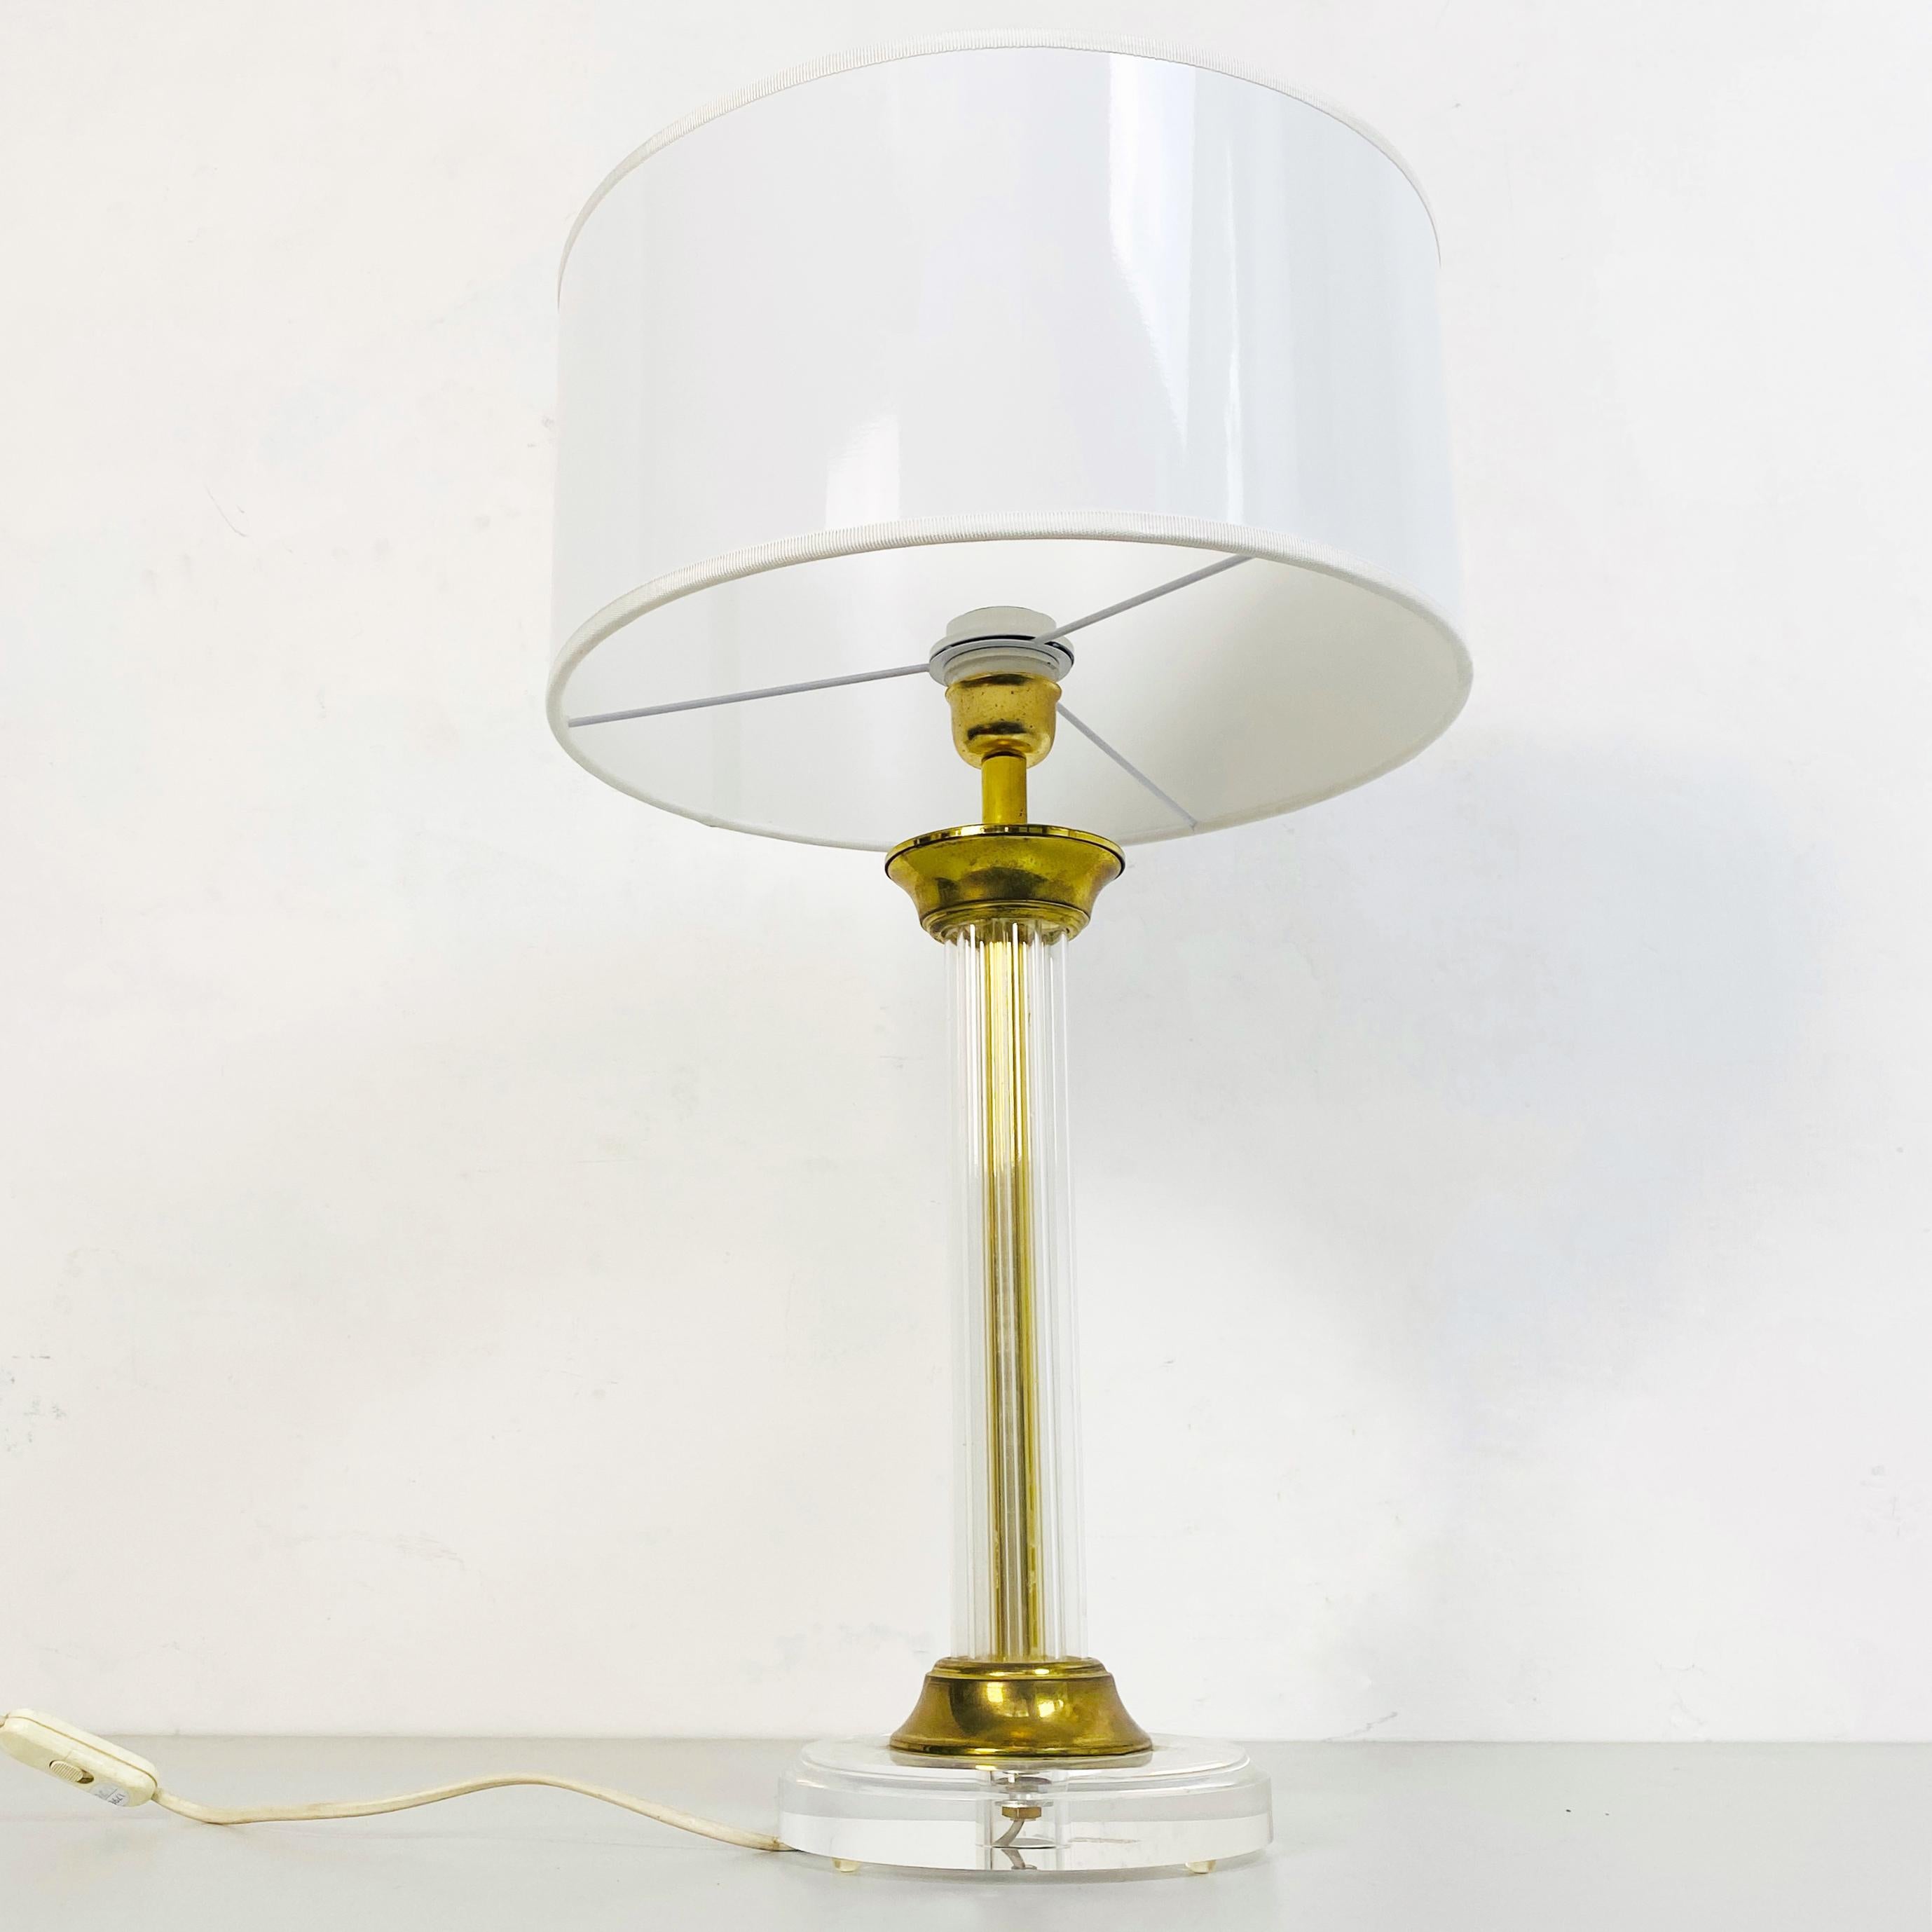 Late 20th Century Italian Mid-Century Column-Shaped Plexiglass and Brass Table Lamp, 1970s For Sale